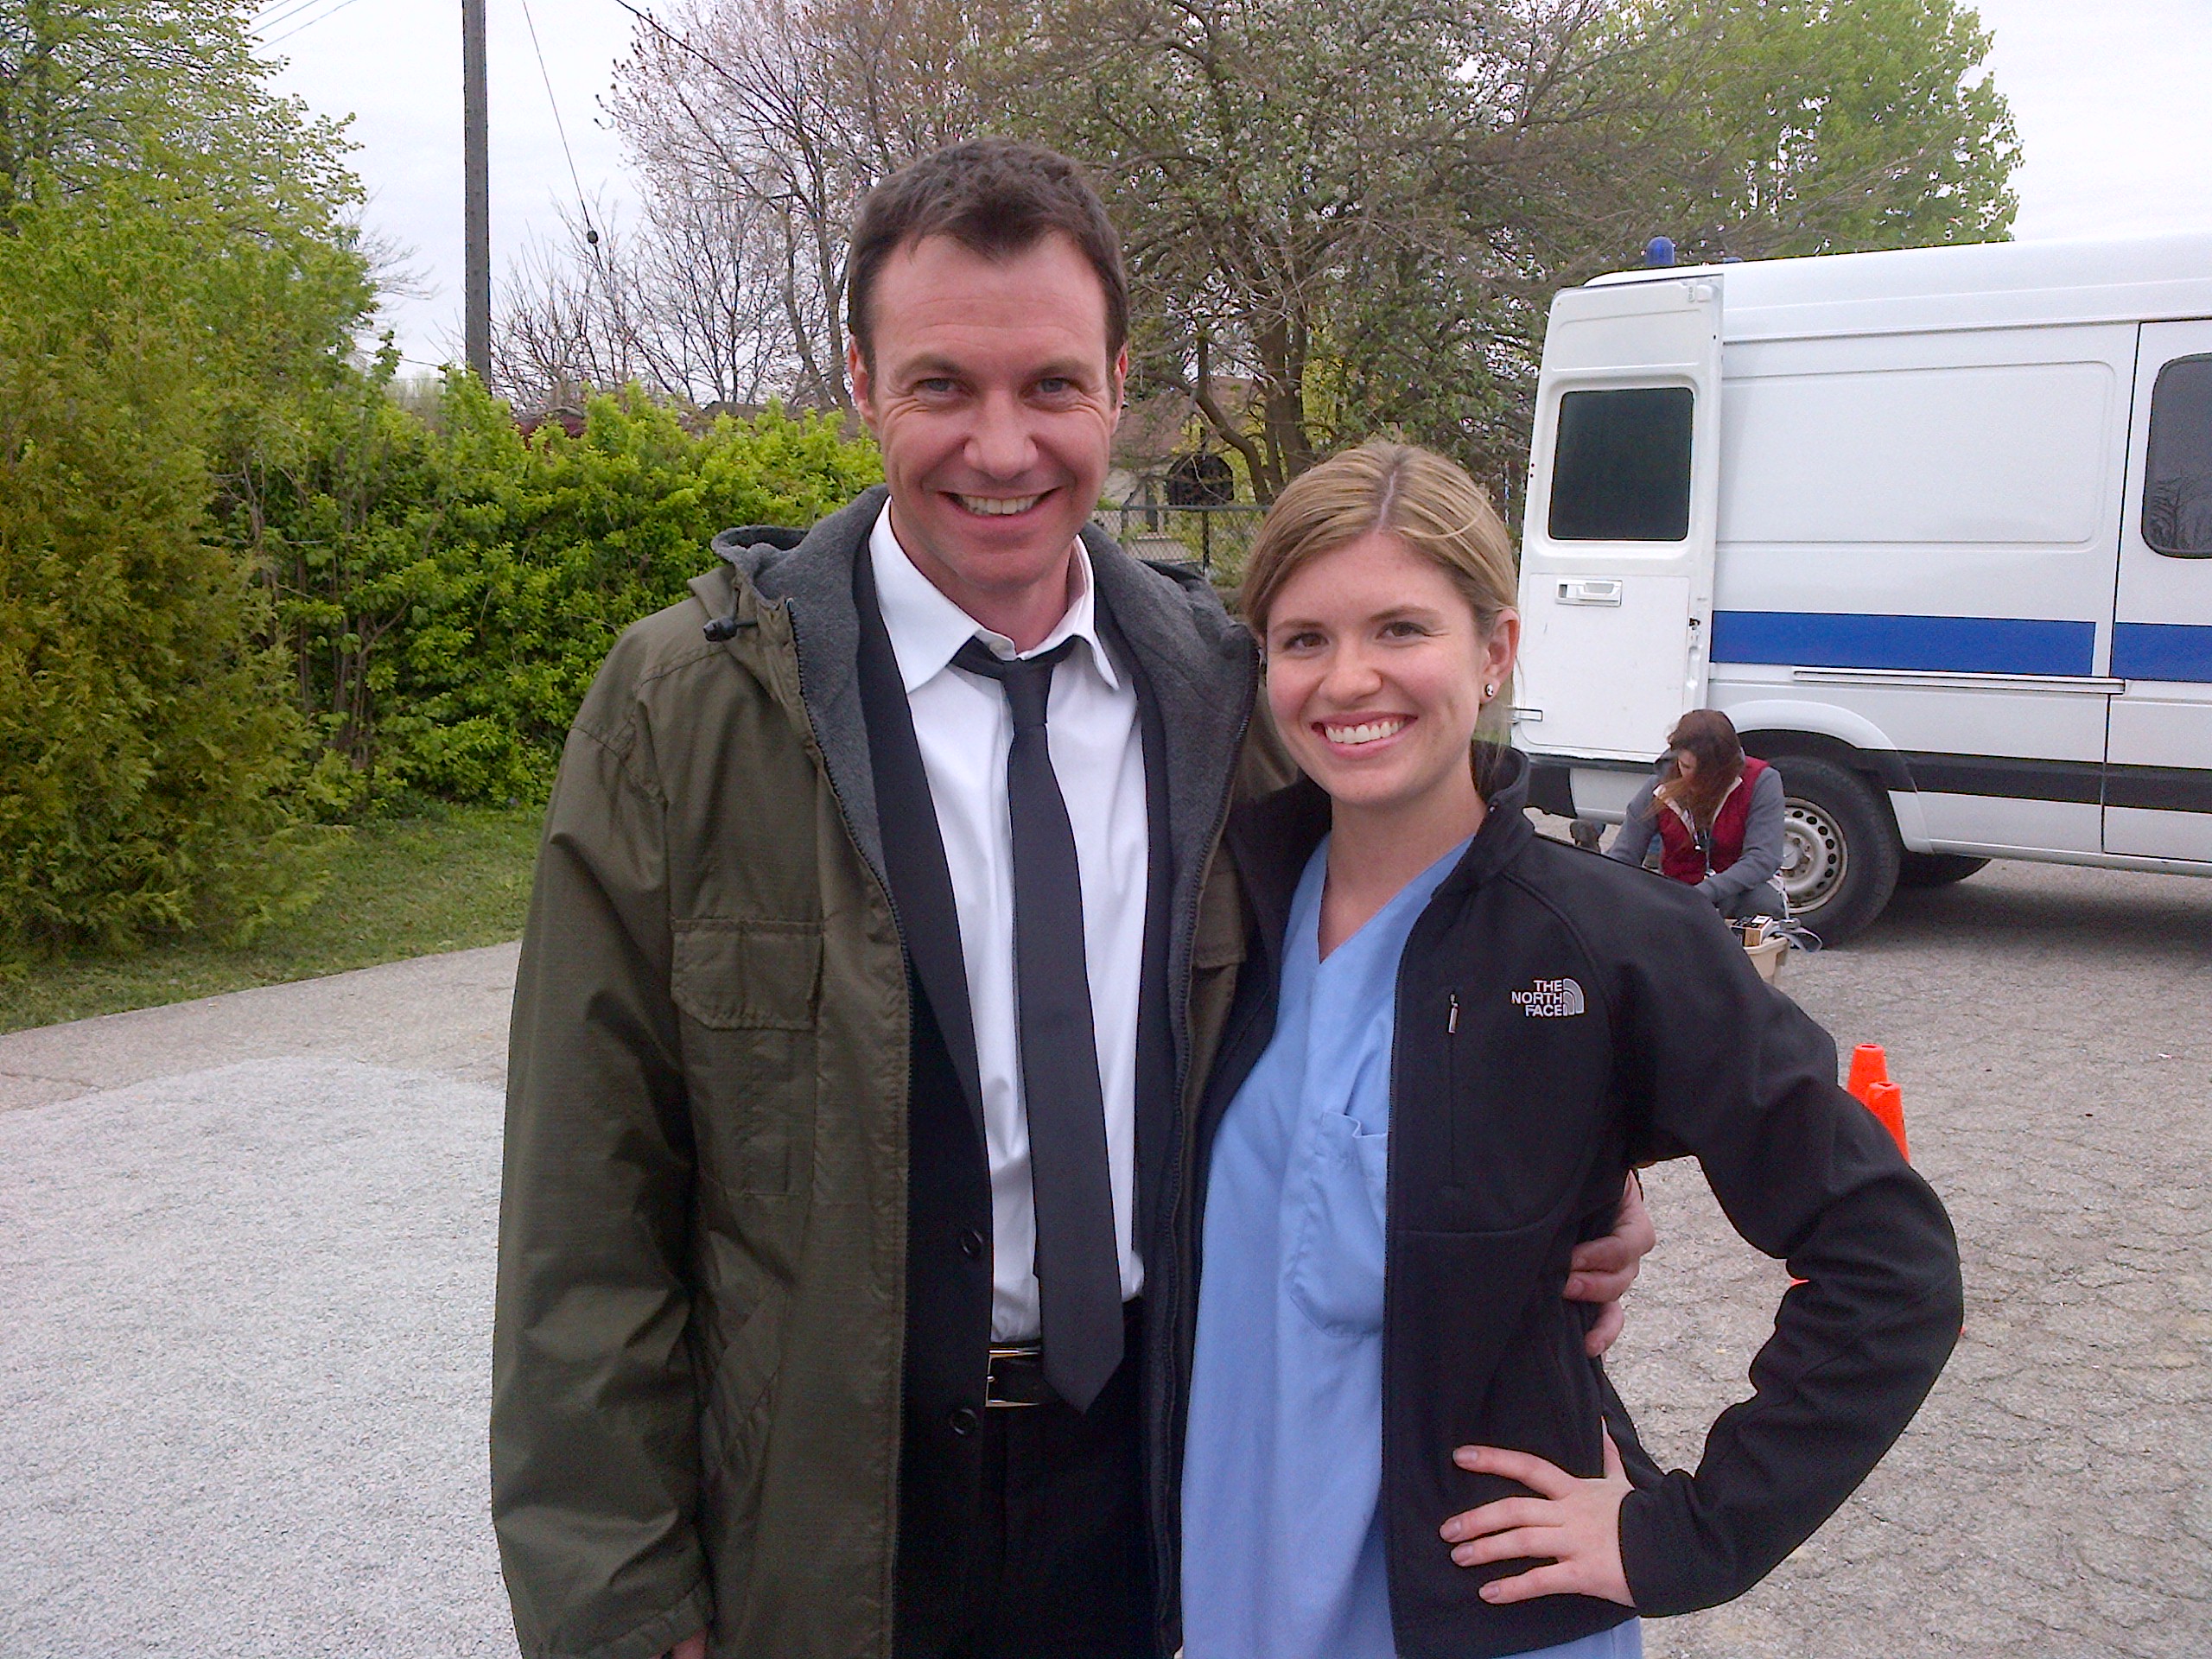 Chris Vance and Olivia Gudaniec on the set of 